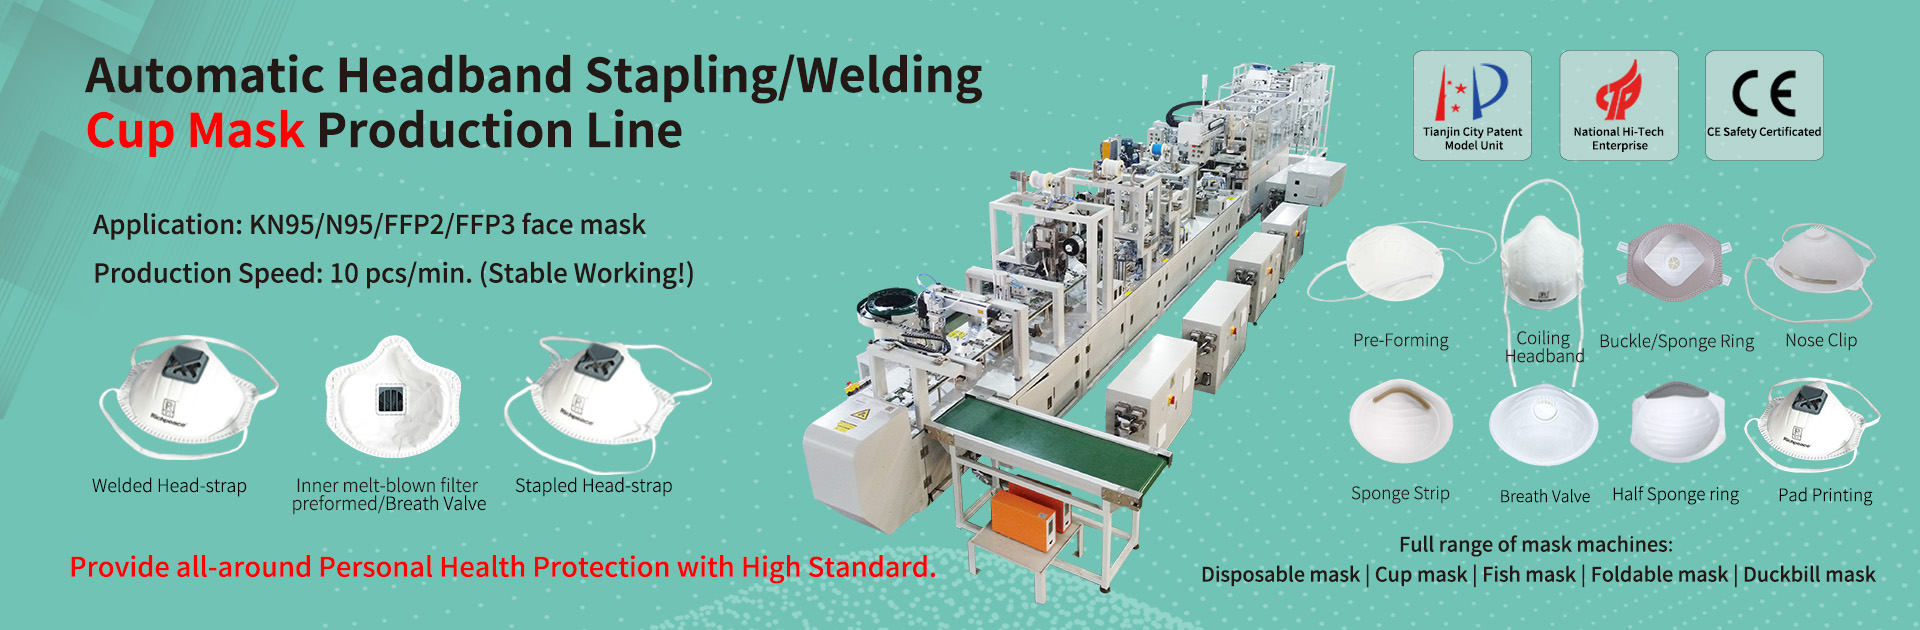 Richpeace Automatic Cup Mask Production Line (Inner filter Preforming, Head Strap Stapling or Welding)